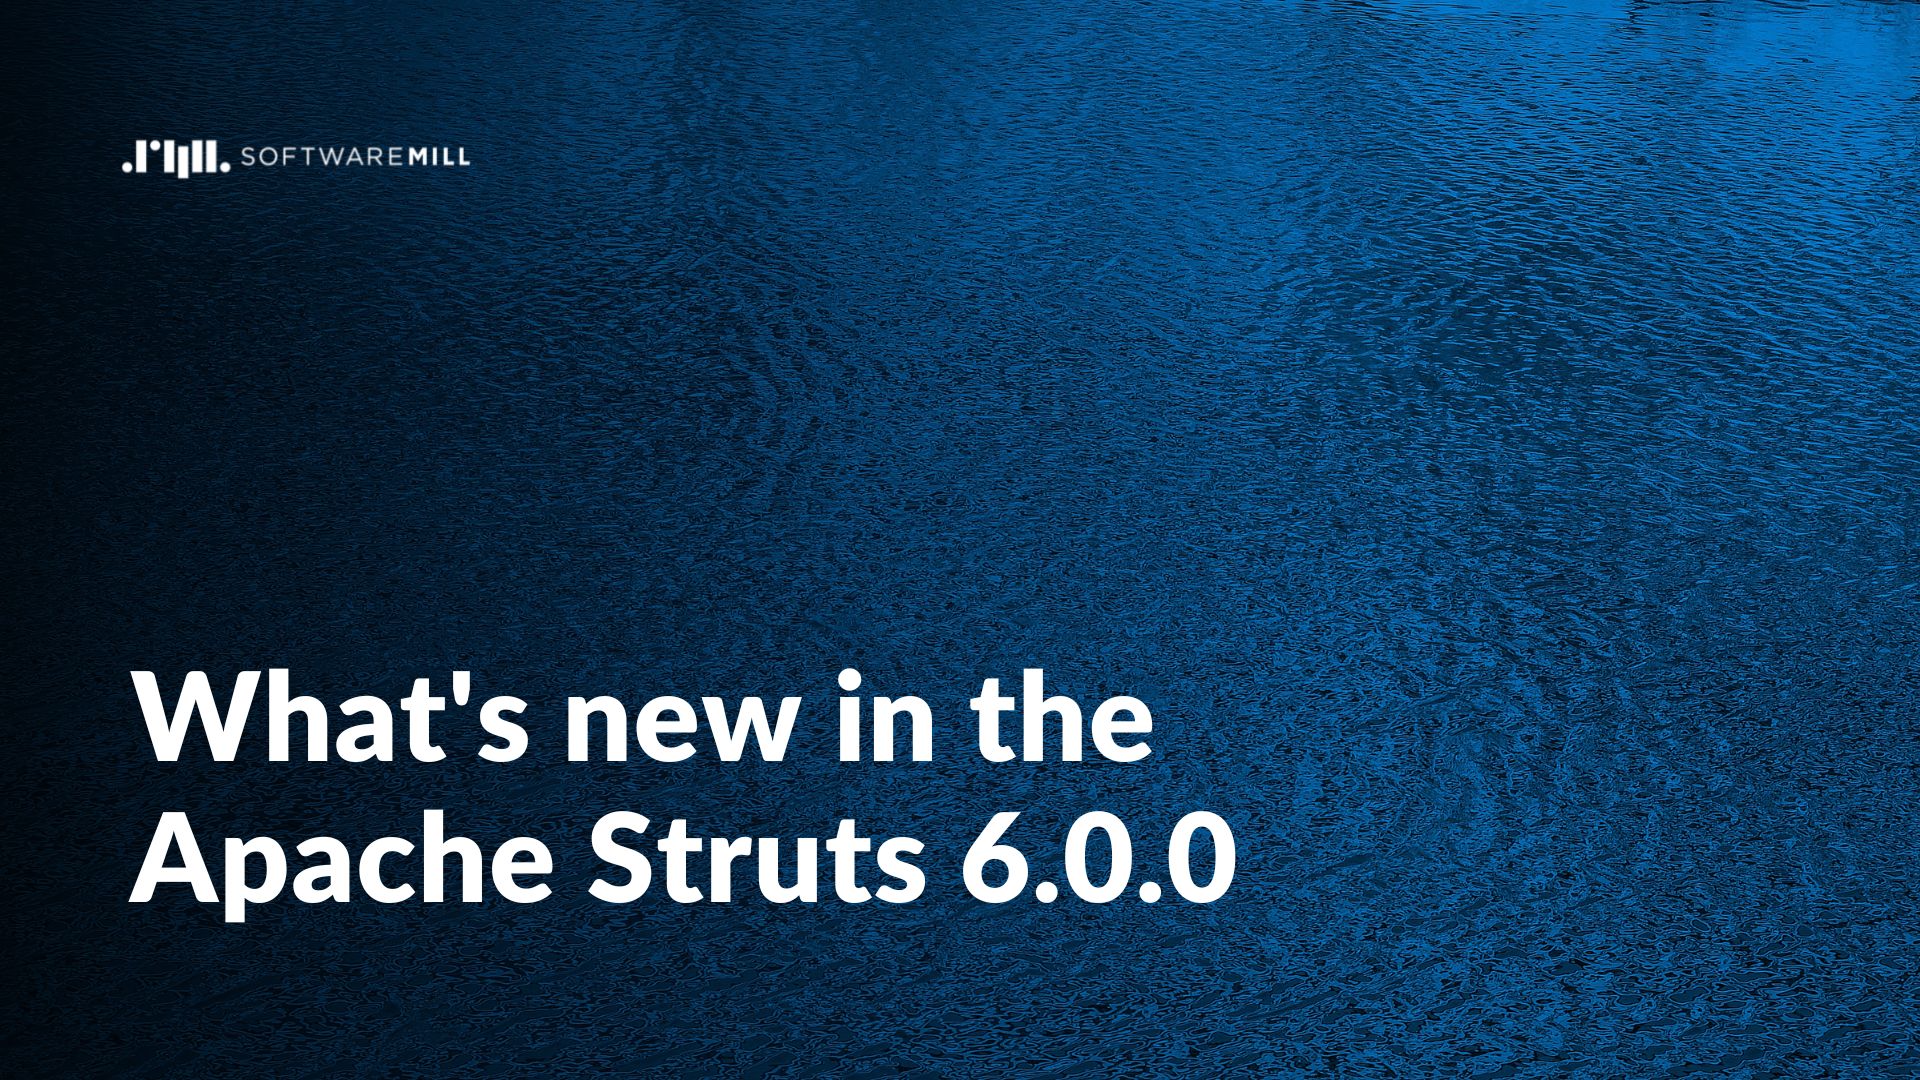 What's new in the Apache Struts 6.0.0 webp image